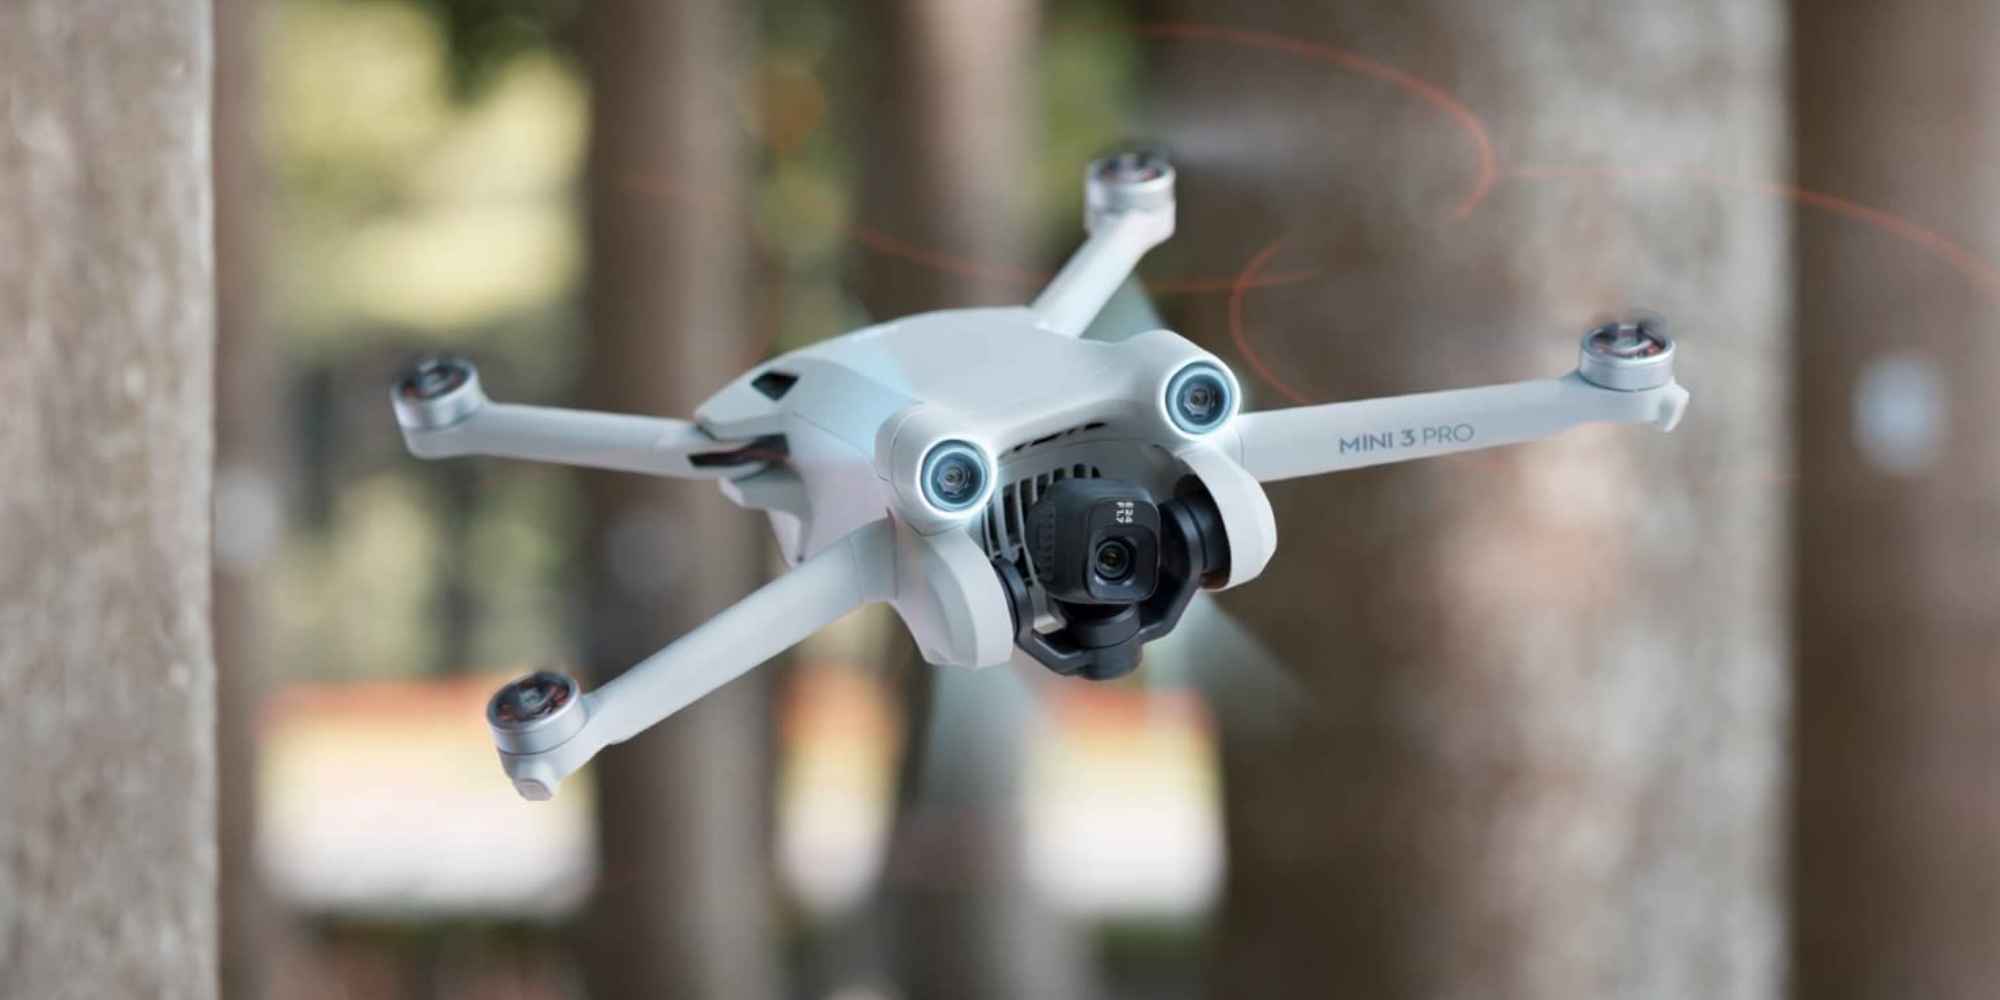 DJI's Mini 3 Pro folding drone shoots vertical video at $600 (Save $159),  with DJI RC at $730